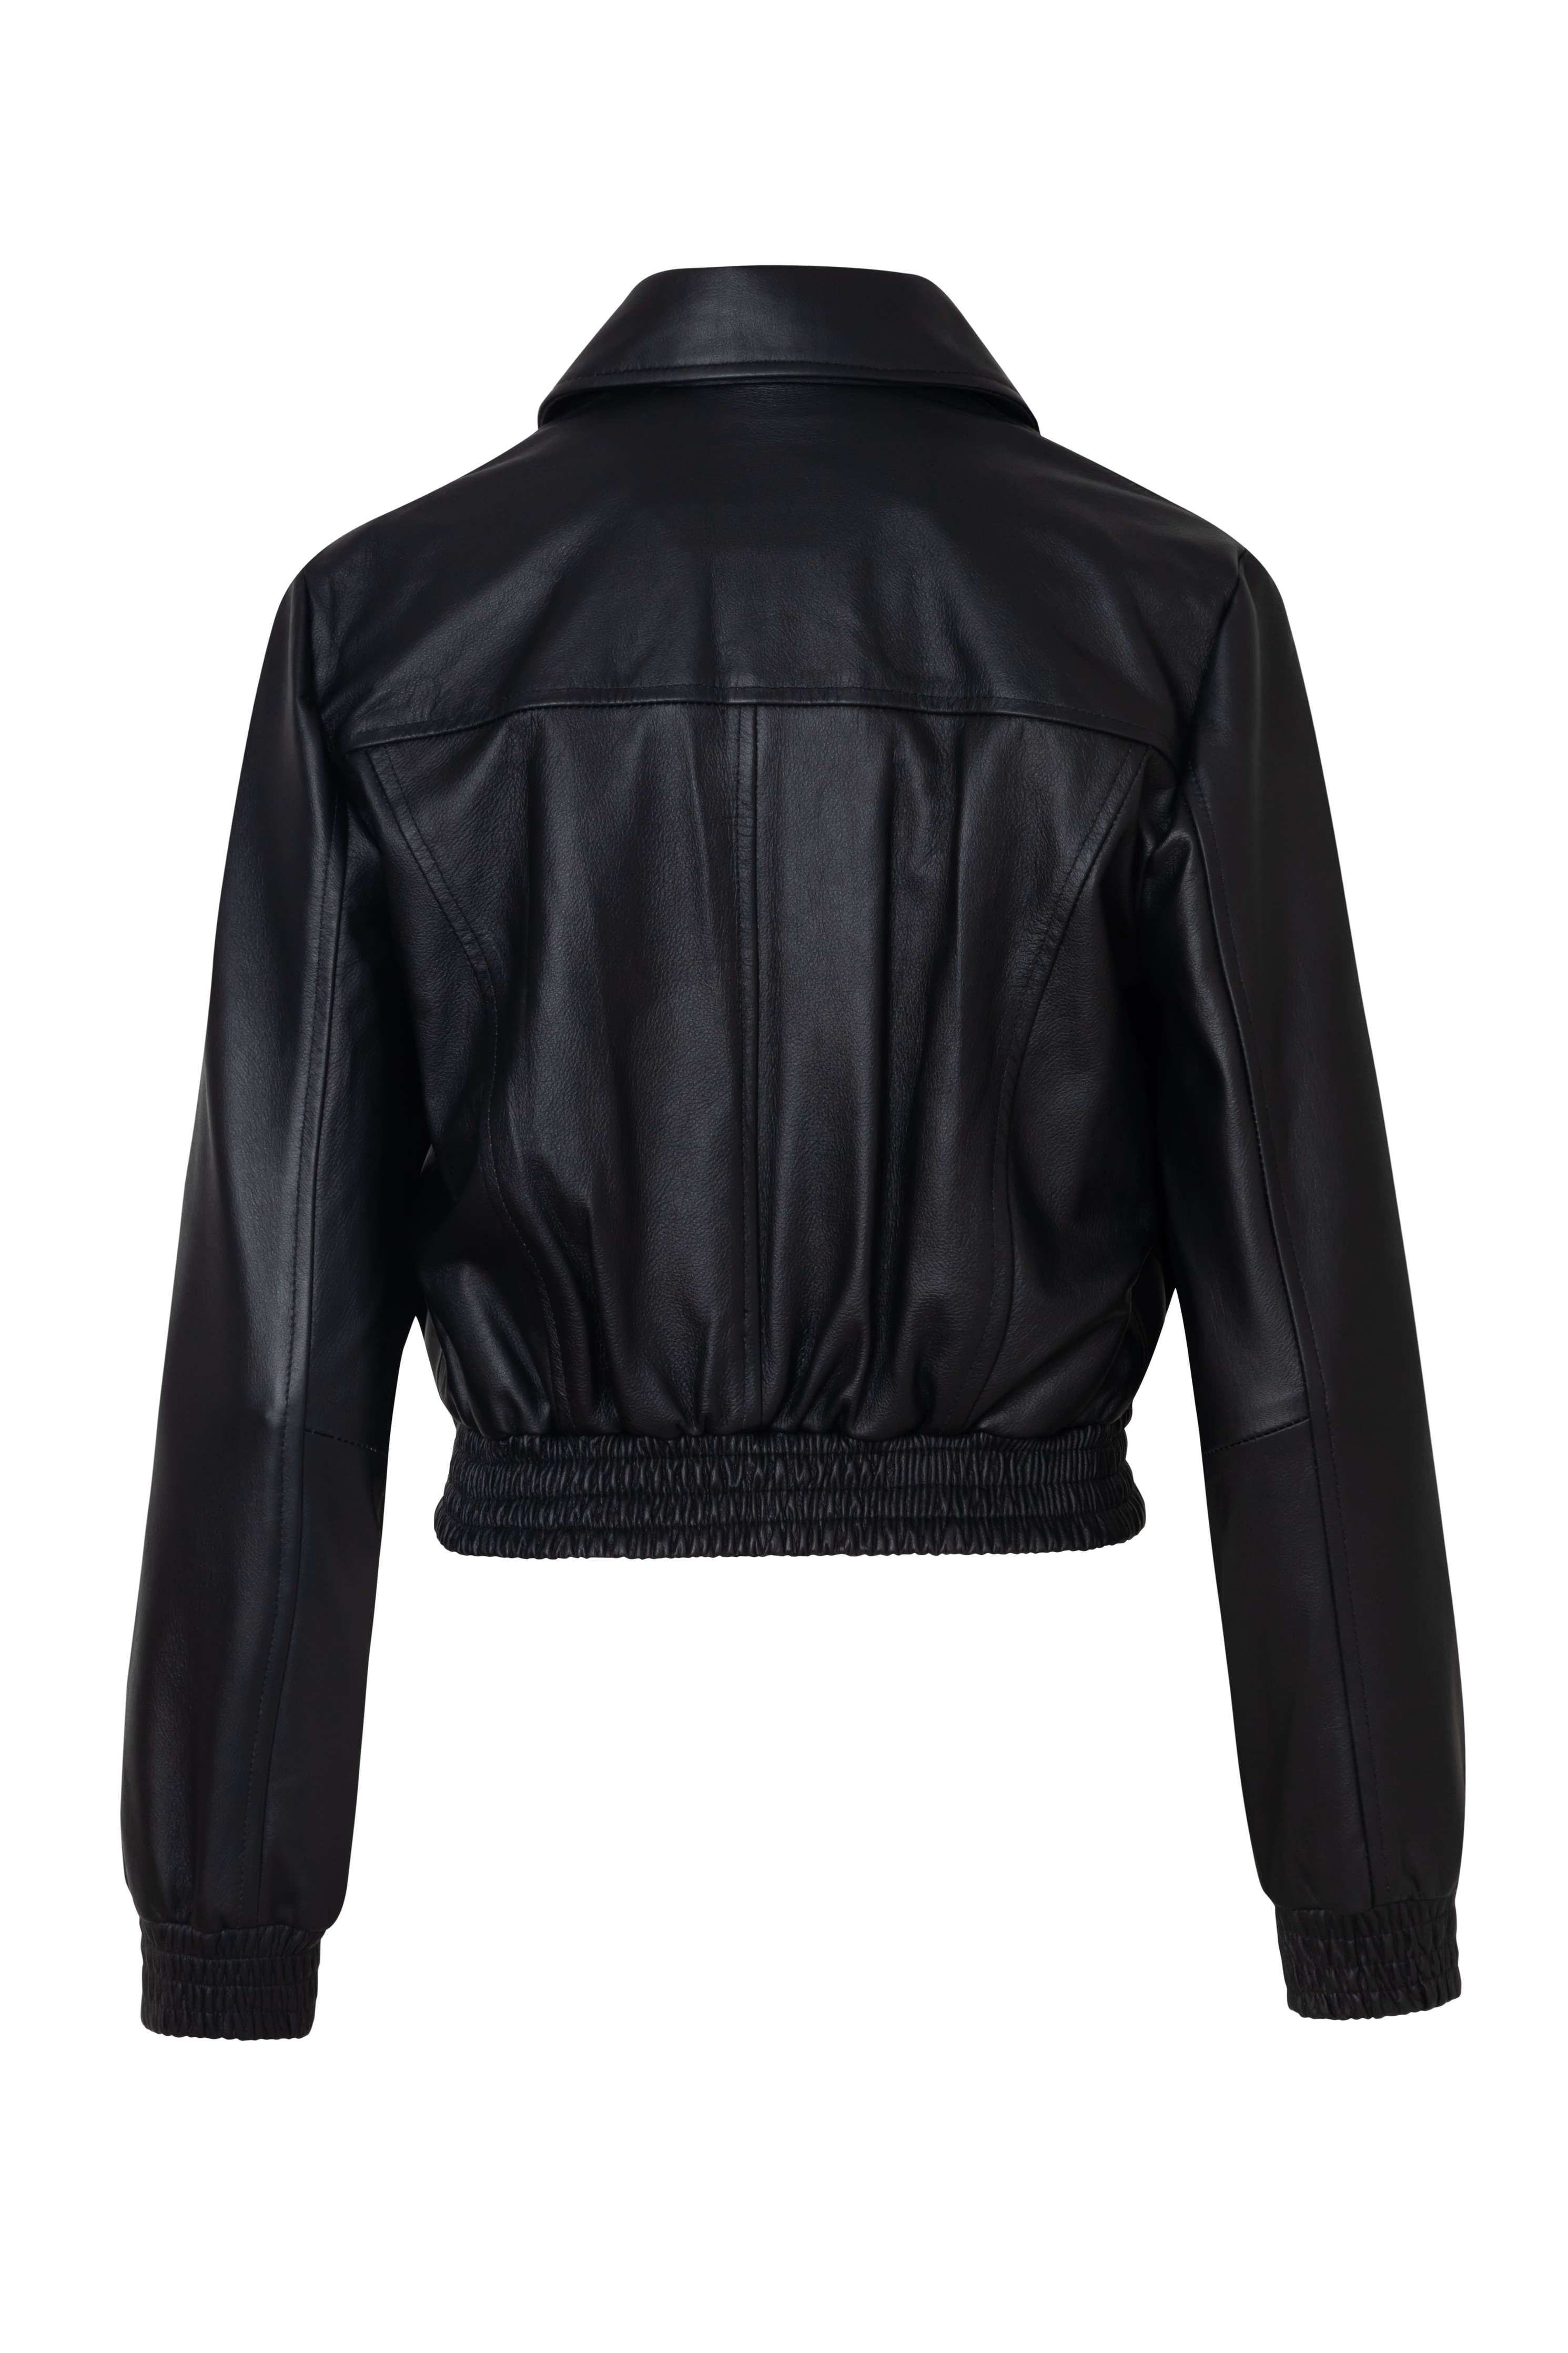 BOMBER jacket - BLACK - the PERFECT dose OF madness -